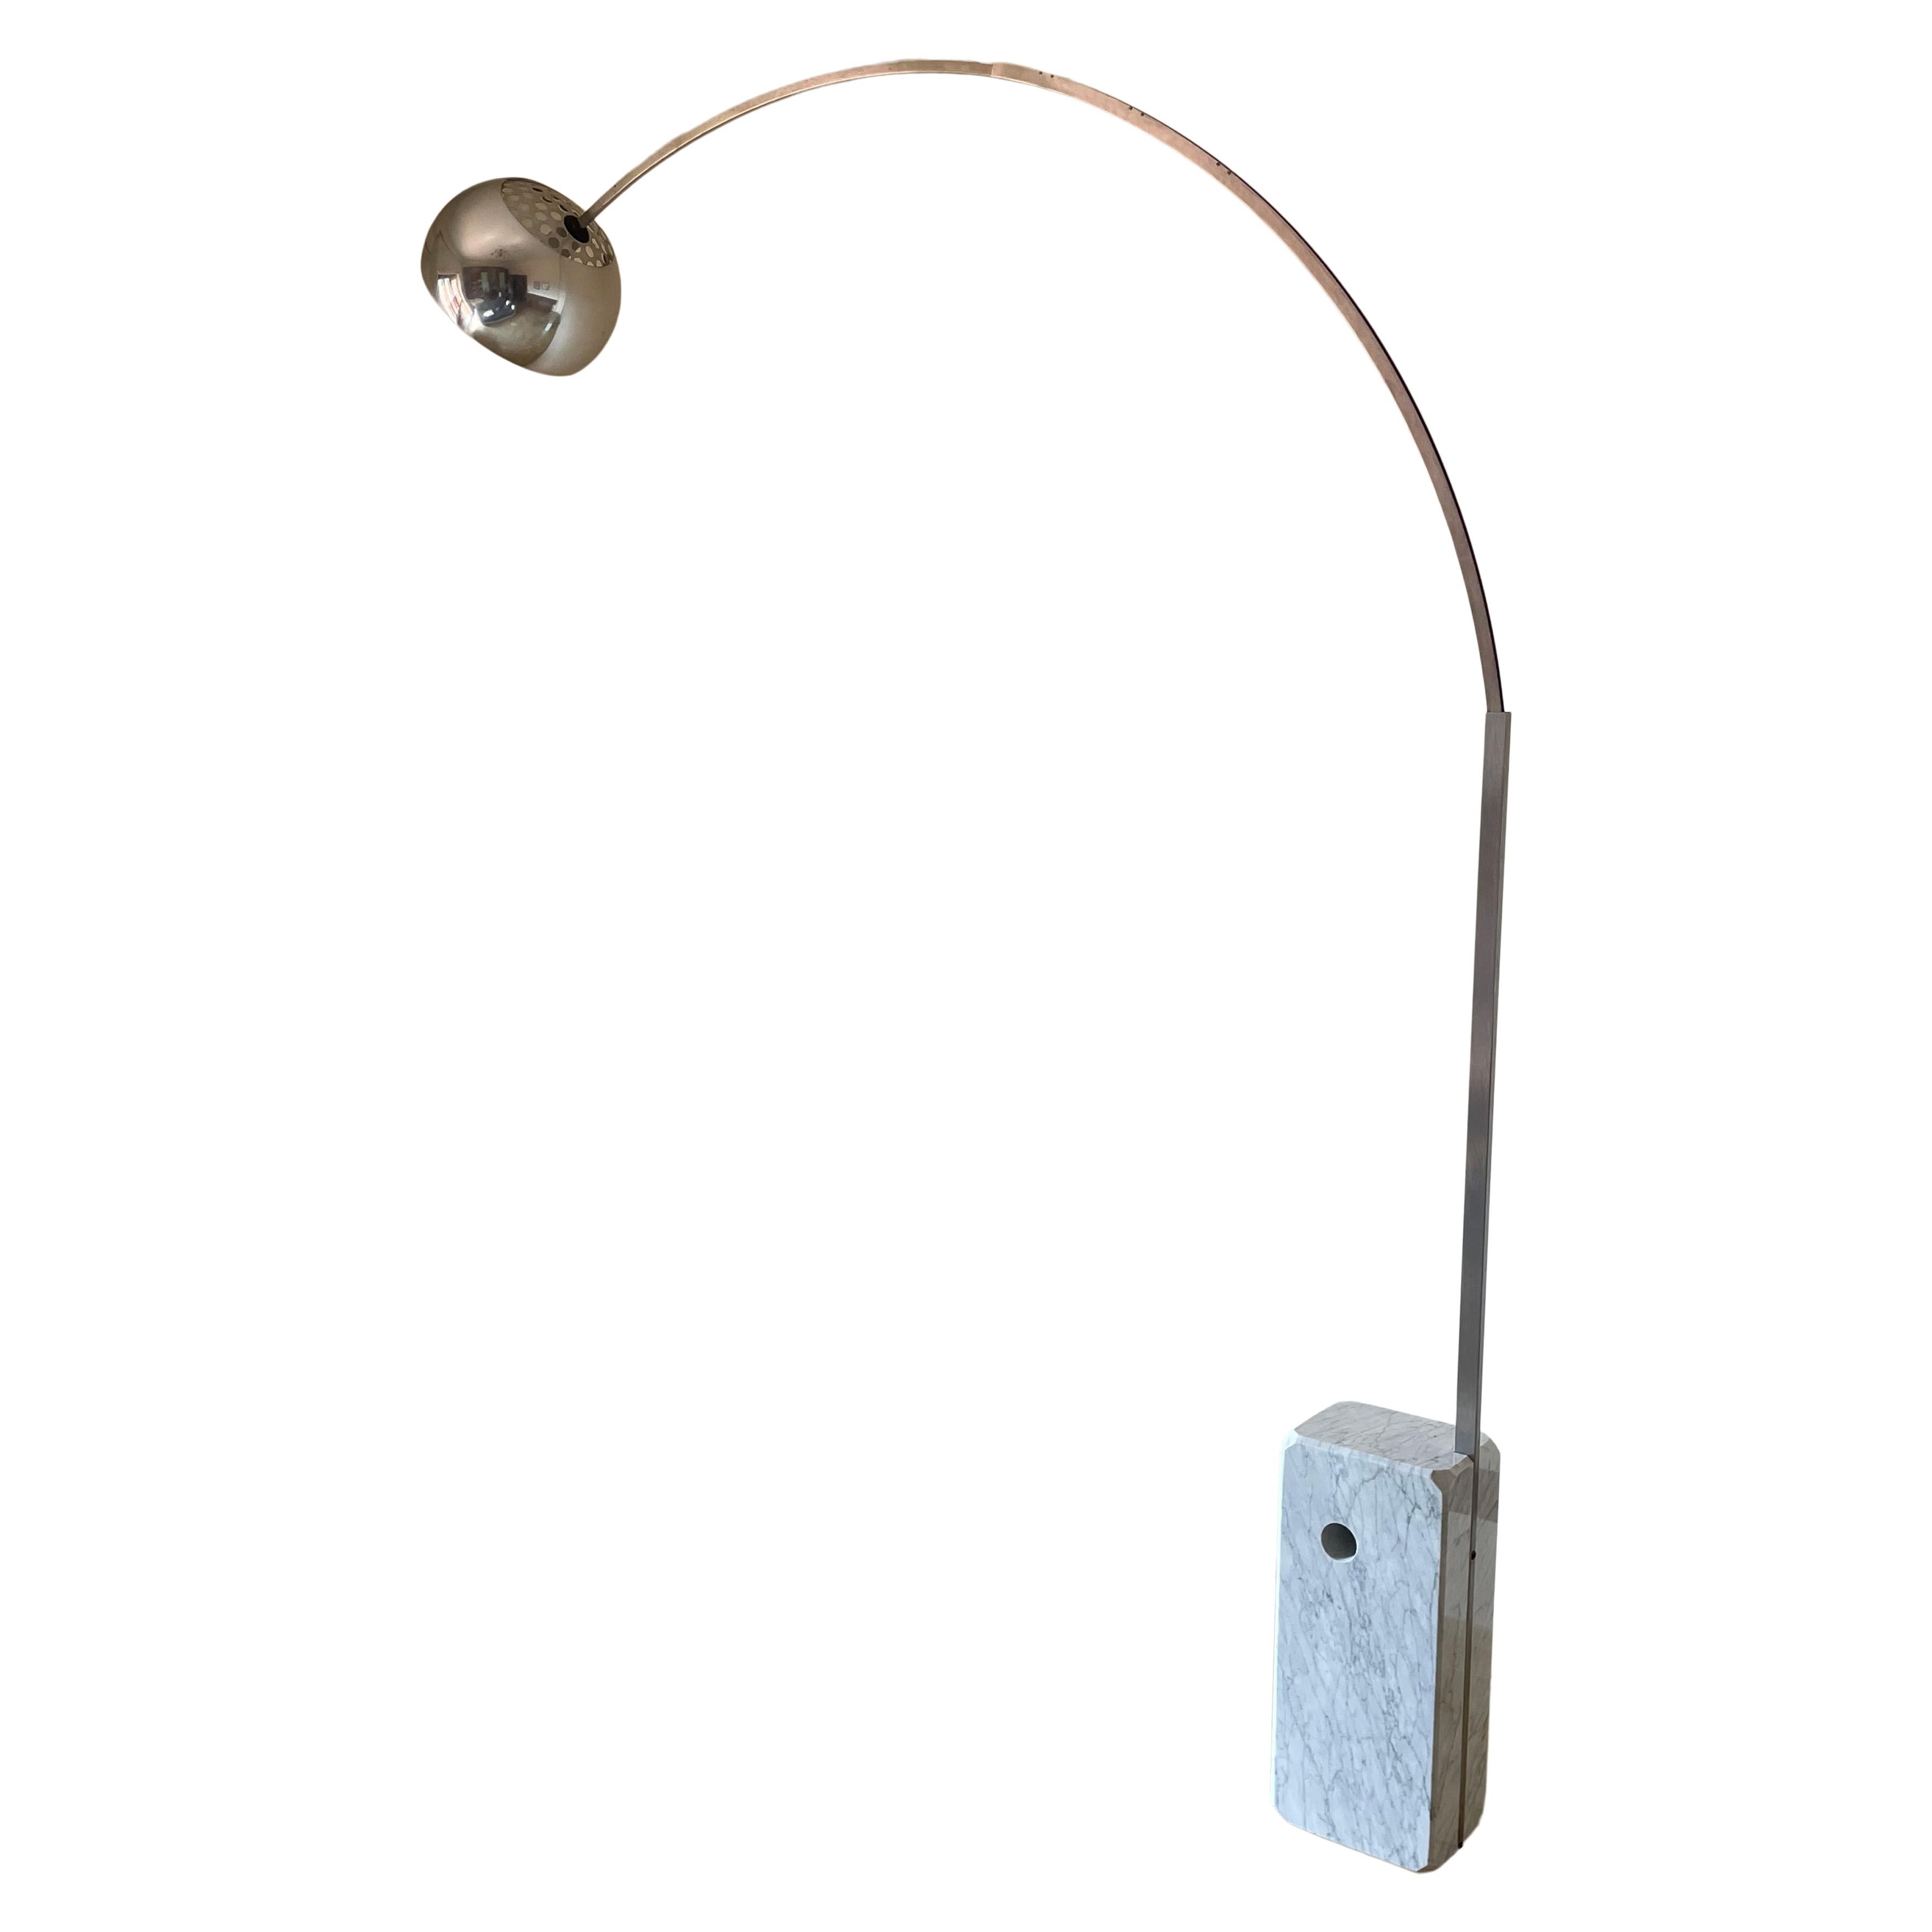 Arco lamp designed by Achille and Pier Giacomo Castiglioni in 1962 and manufactured by the Italian brand FLOS in 1967.

Excellent vintage condition.

From the outside, it looks like a simple floor lamp. A structure, a bulb, and a base. But there is